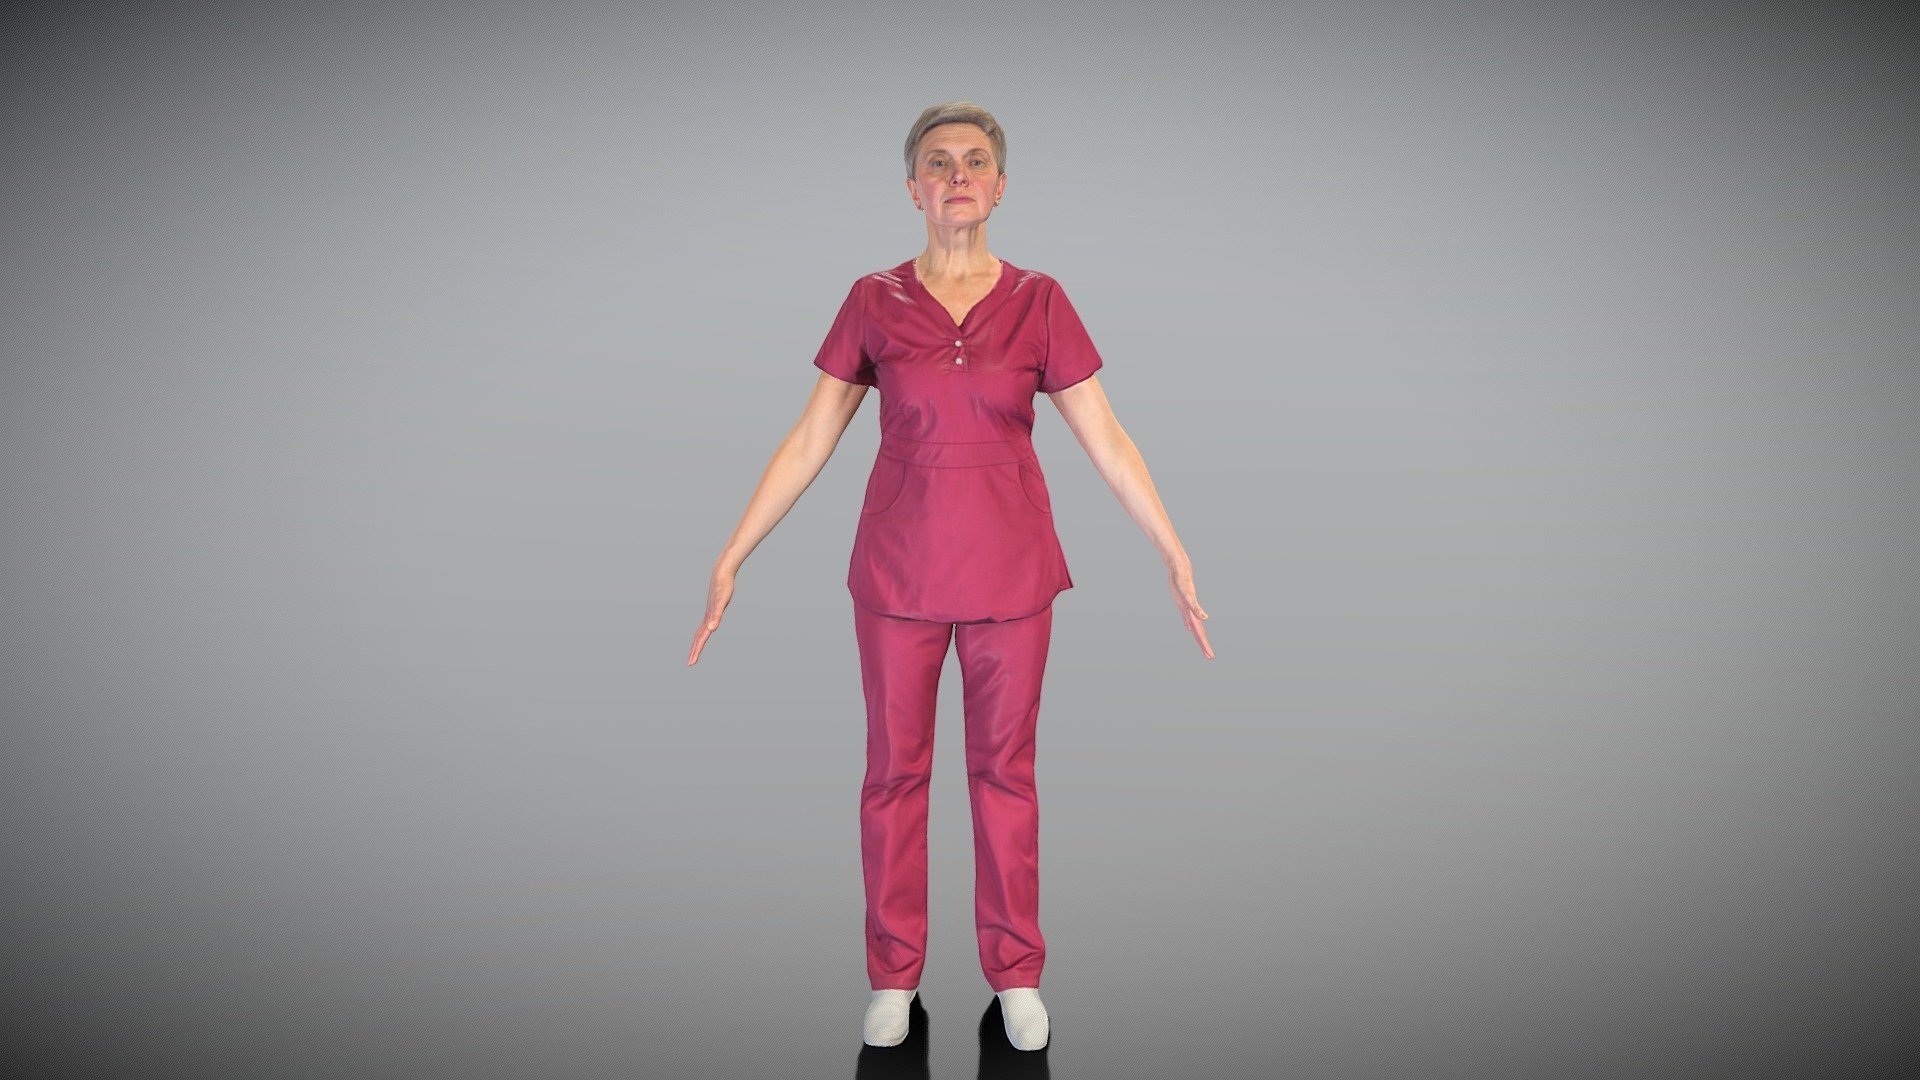 This is a true human size and detailed model of a beautiful woman of Caucasian appearance dressed in medical uniform. The model is captured in the A-pose with mesh ready for rigging and animation in all most usable 3d software. The product is ready both for immediate use in architectural visualisations, or further render and detailed sculpting in Zbrush.

Technical specifications:




digital double scan model

low-poly model

high-poly model (.ztl tool with 5-6 subdivisions) clean and retopologized automatically via ZRemesher

fully quad topology

sufficiently clean

edge Loops based

ready for subdivision

8K texture color map

non-overlapping UV map

ready for animation

PBR textures 8K resolution: Normal, Displacement, Albedo maps

Download package includes a Cinema 4D project file with Redshift shader, OBJ, FBX, STL files, which are applicable for 3ds Max, Maya, Unreal Engine, Unity, Blender, etc.

3D EVERYTHING

Stand with Ukraine! - Nurse in pink uniform ready for animation 447 - Buy Royalty Free 3D model by deep3dstudio 3d model